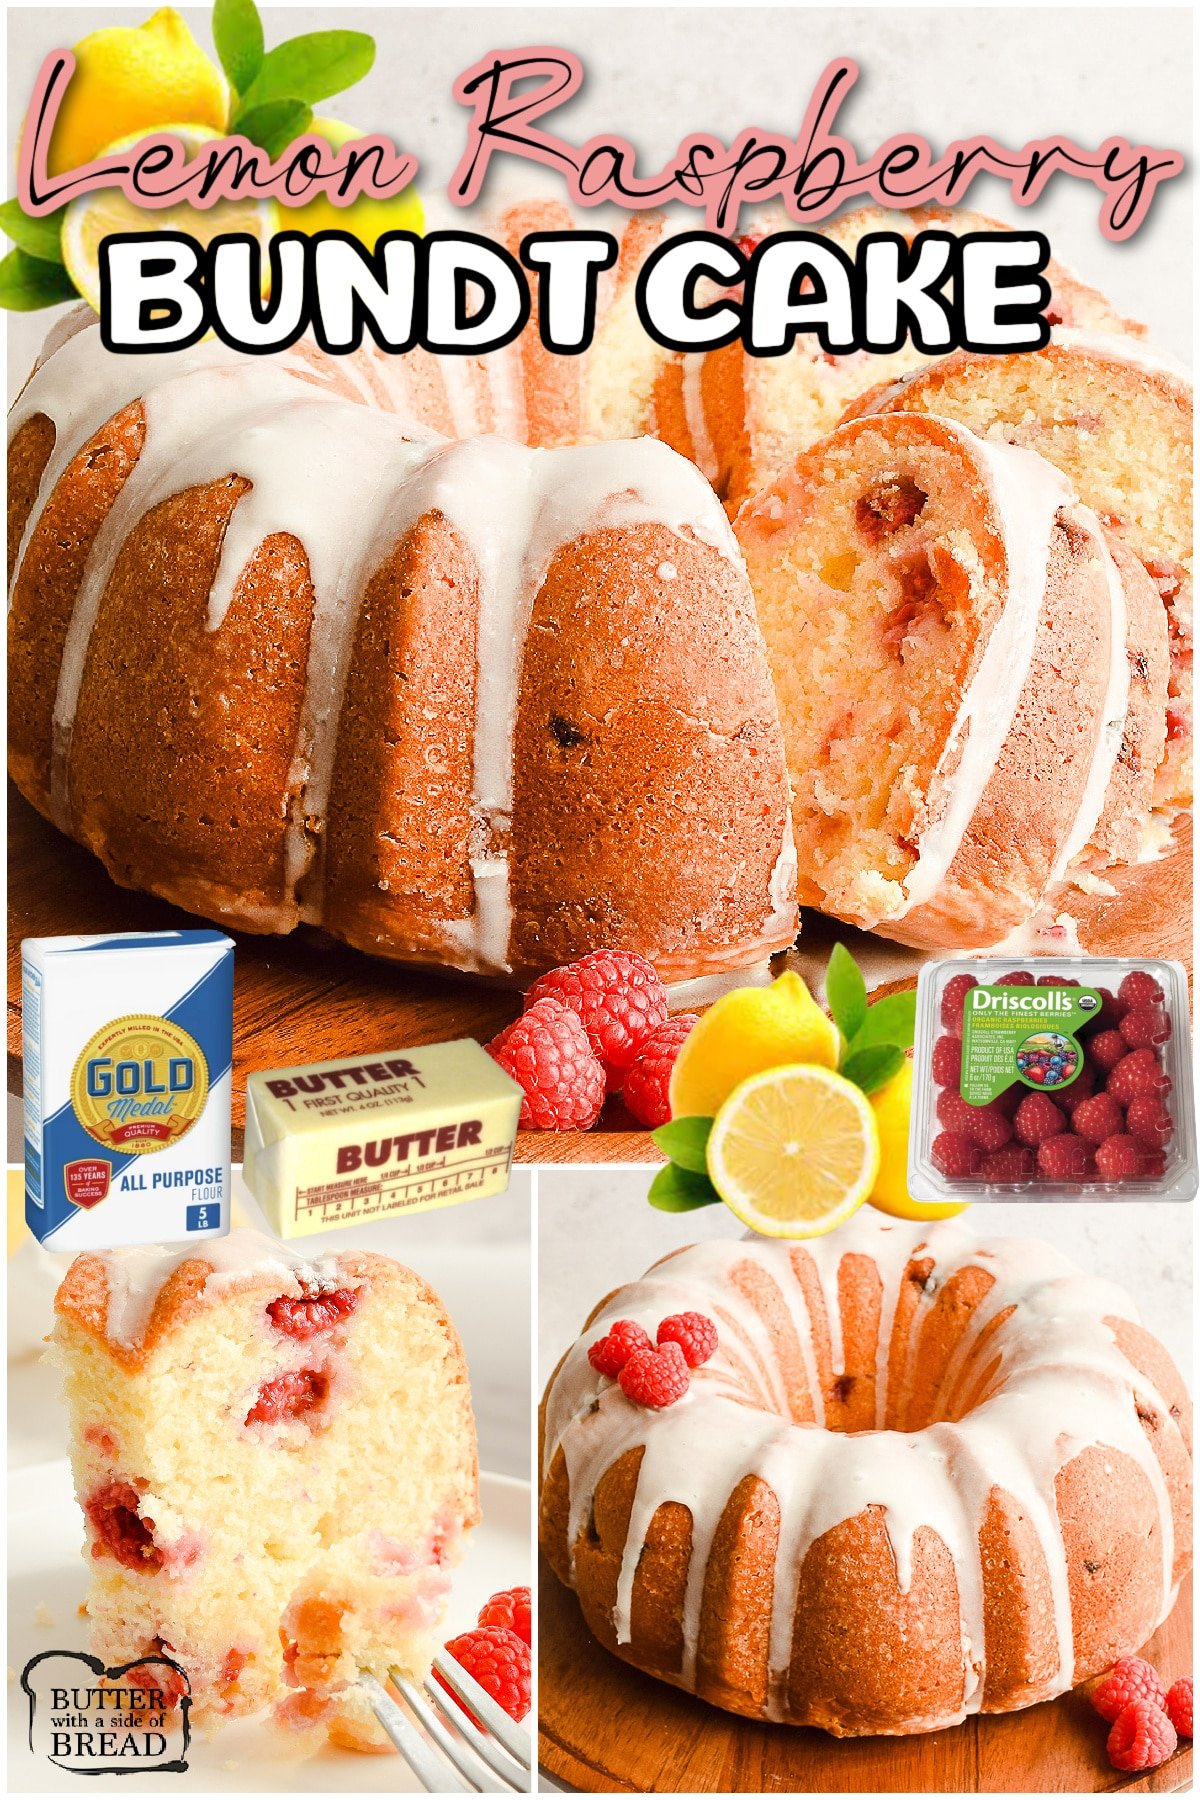 Lemon Raspberry Bundt Cake made from scratch & packed with fresh berries and tart lemon flavor in every bite! Delightful homemade bundt cake recipe perfect for Spring! 